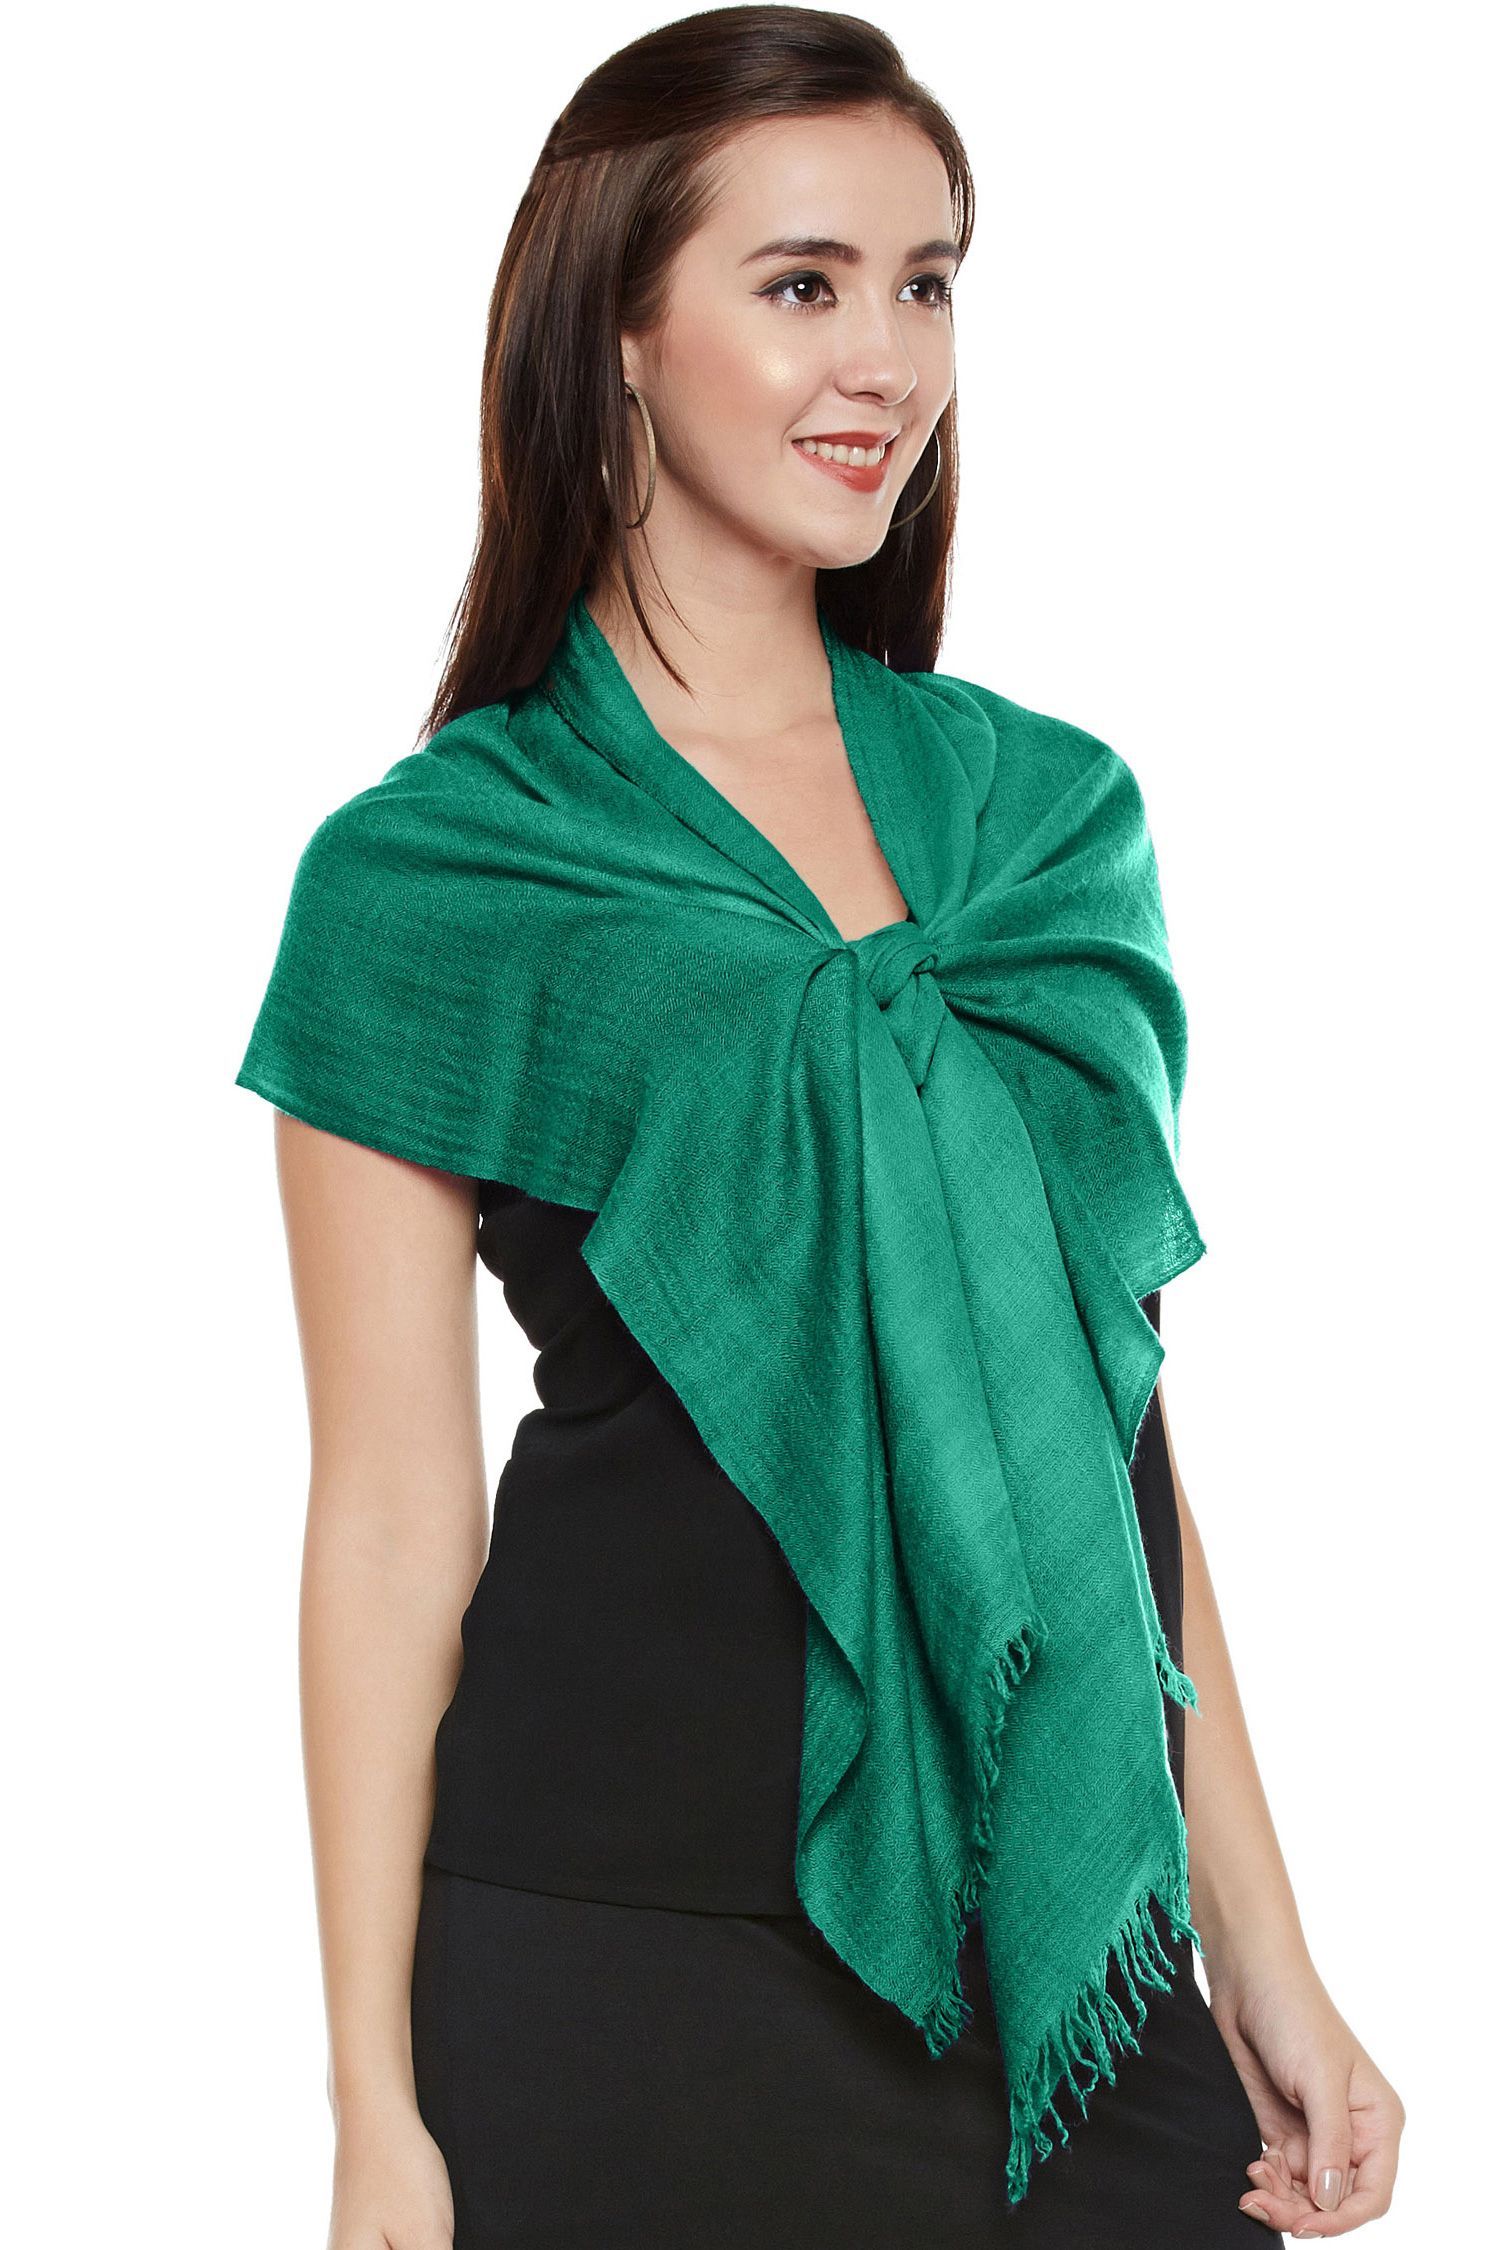 Buy Authentic Emerald Green Cashmere Scarf | Pure Pashmina - 100% ...